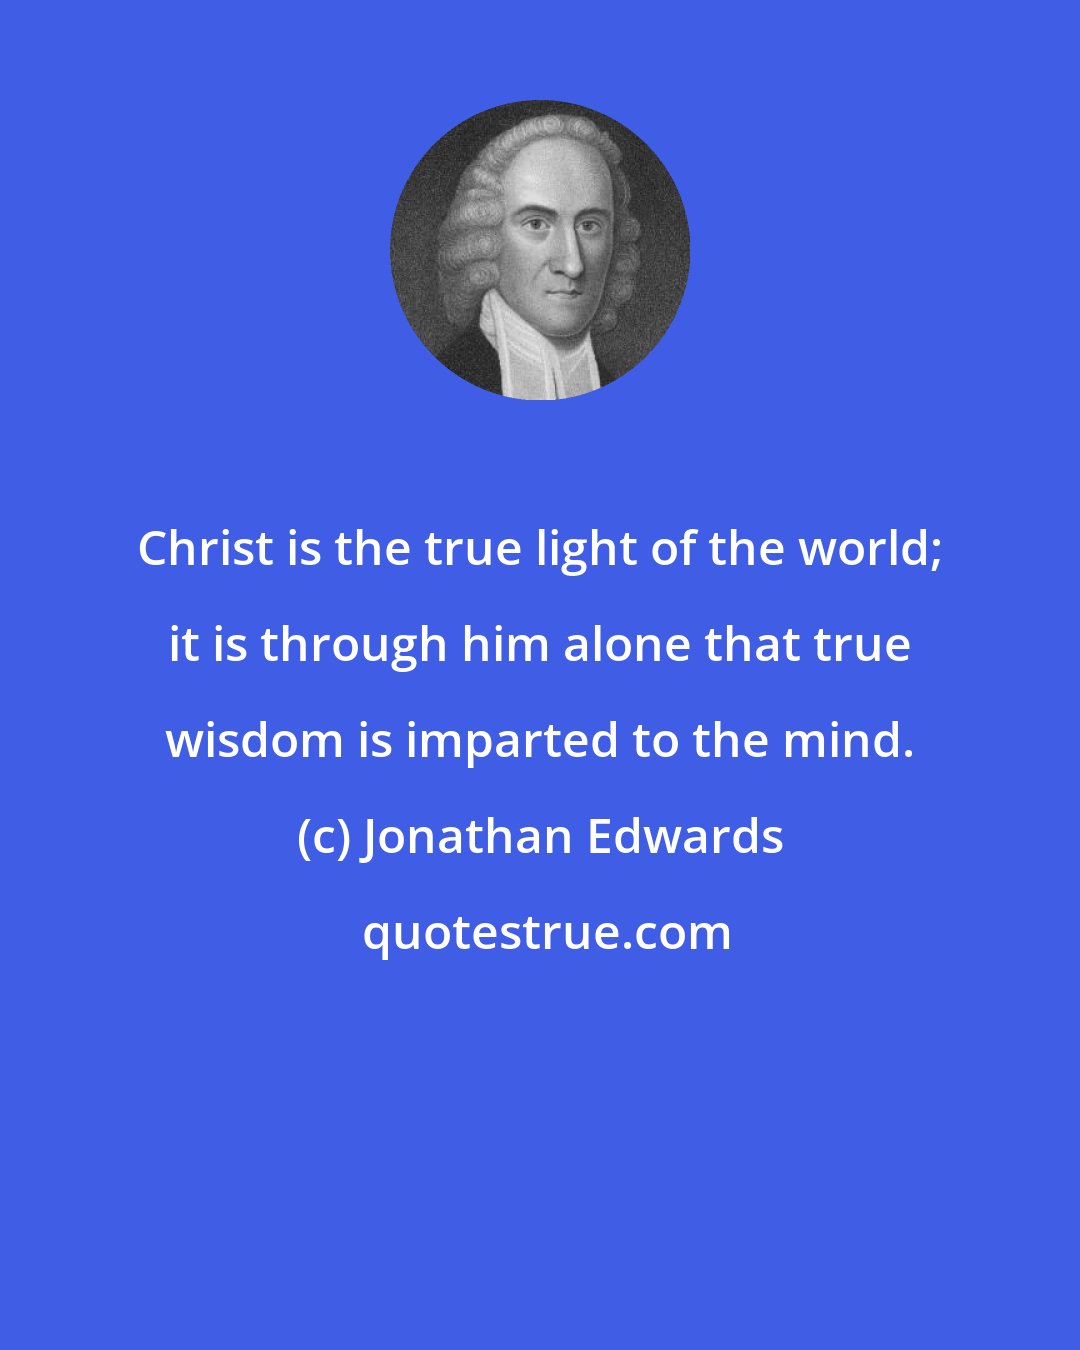 Jonathan Edwards: Christ is the true light of the world; it is through him alone that true wisdom is imparted to the mind.